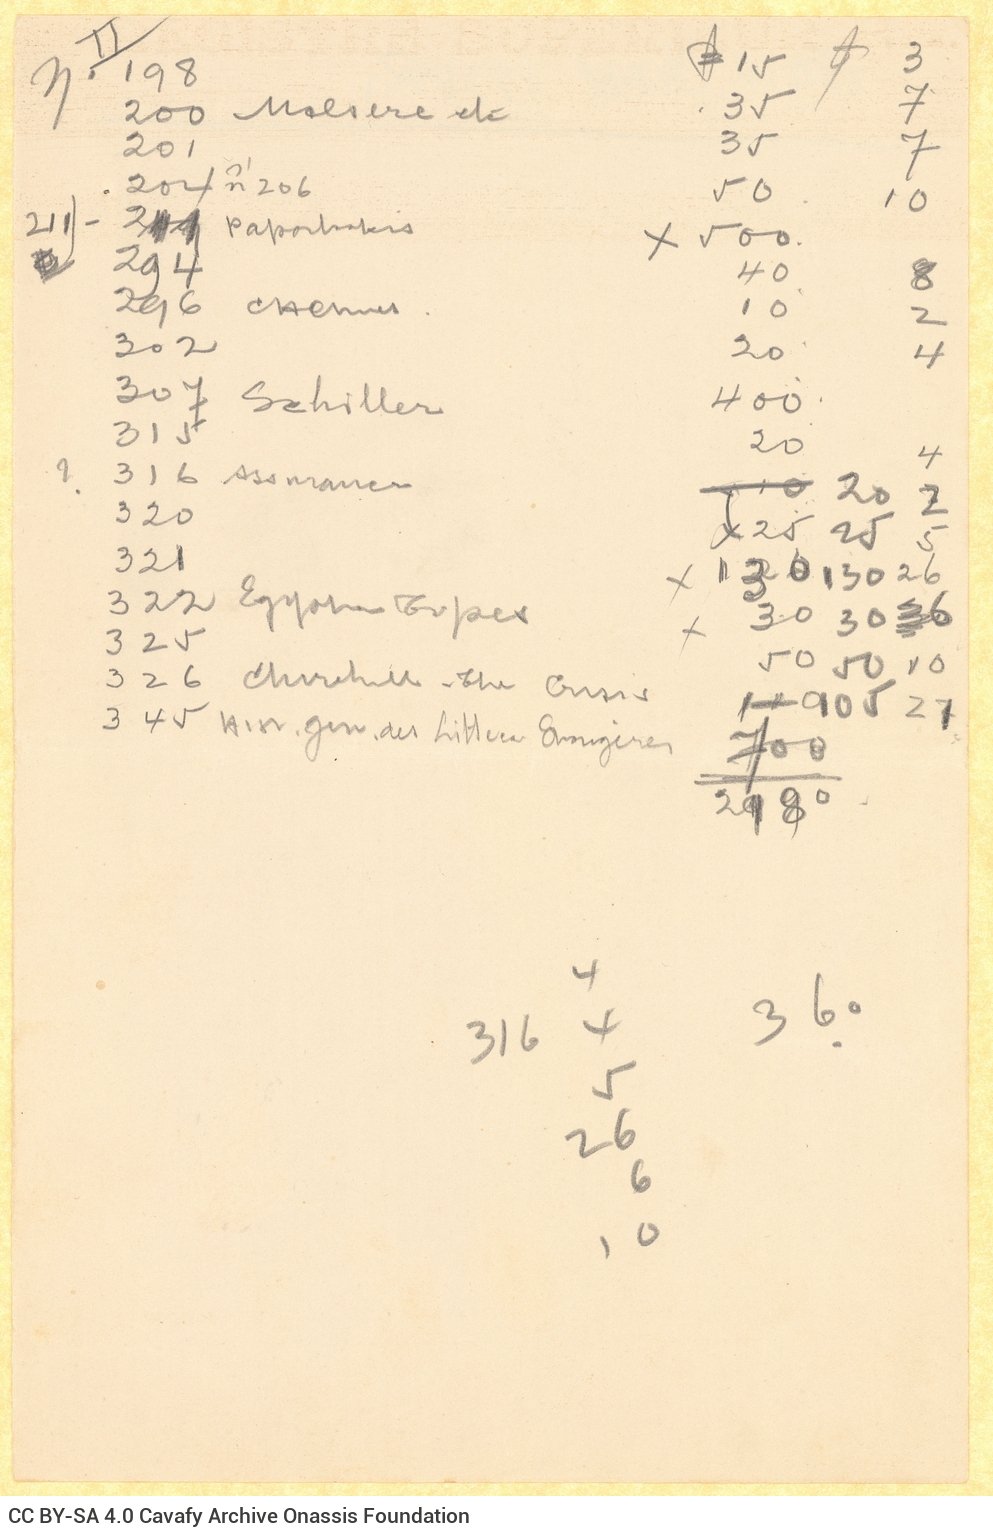 Notes on two sheets, numbered "Ι" and "ΙΙ". References to book titles, authors and purchase prices.